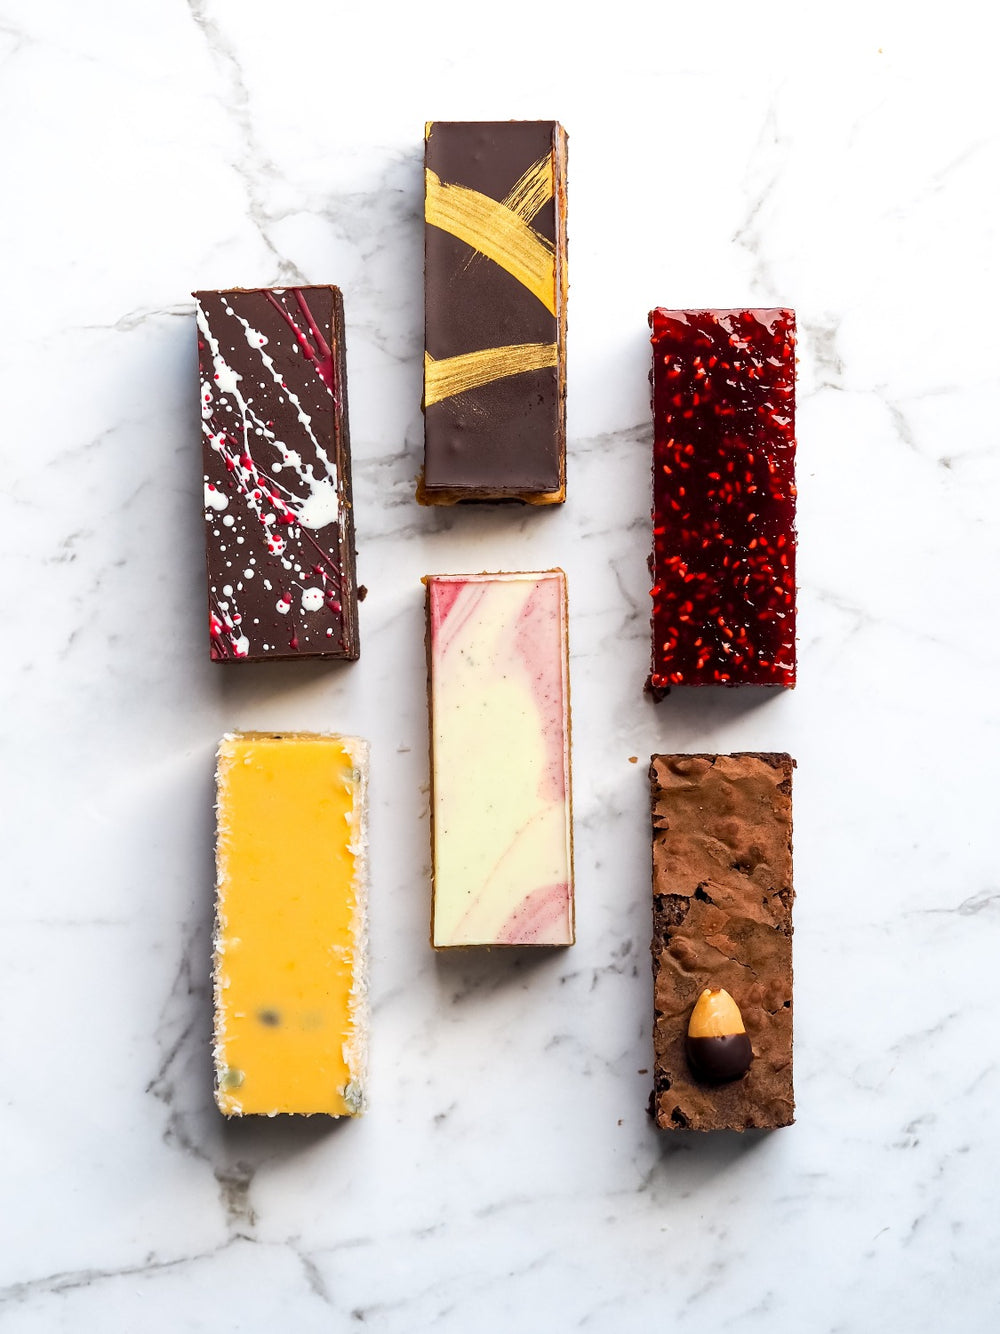 Mob Box 100% Gluten Free Desserts Assorted Melbourne Wide Next Business Day Deliveries Slices Chocolate Lemon Passionfruit Caramel Salted Caramel Roasted Almonds Hazelnuts Handmade Tasty Decadent